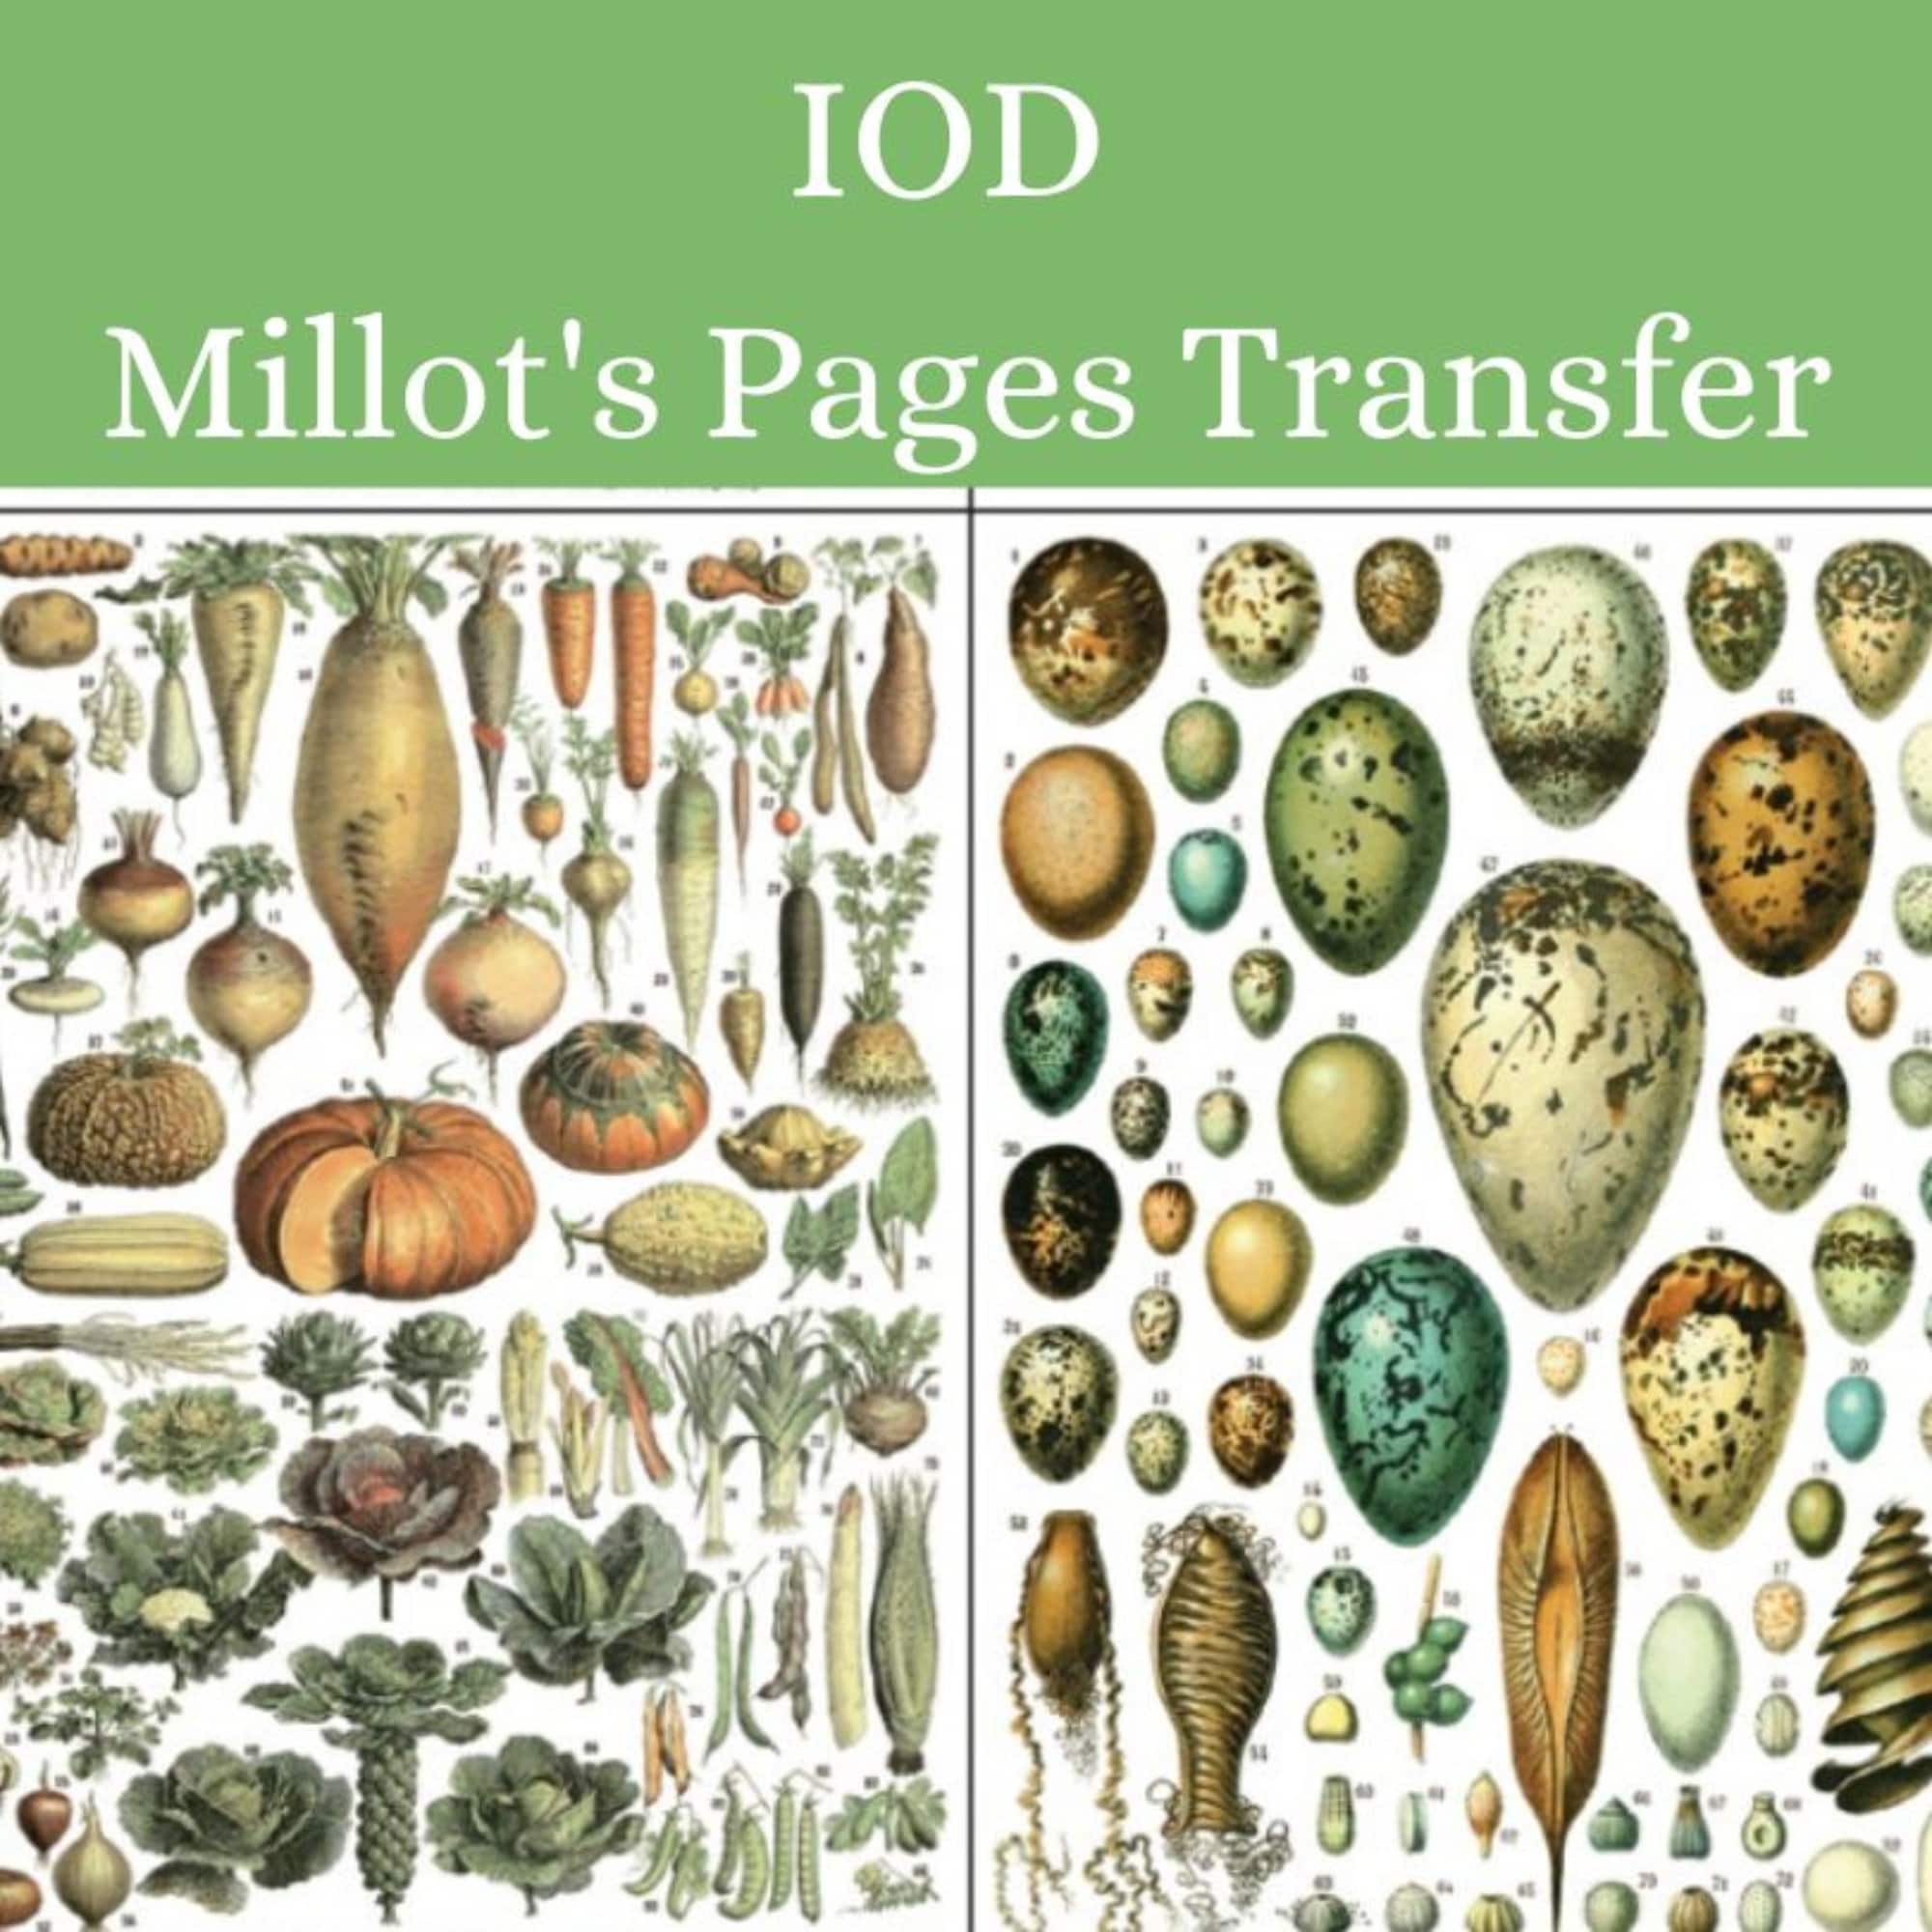 Millots Pages Transfer from IOD